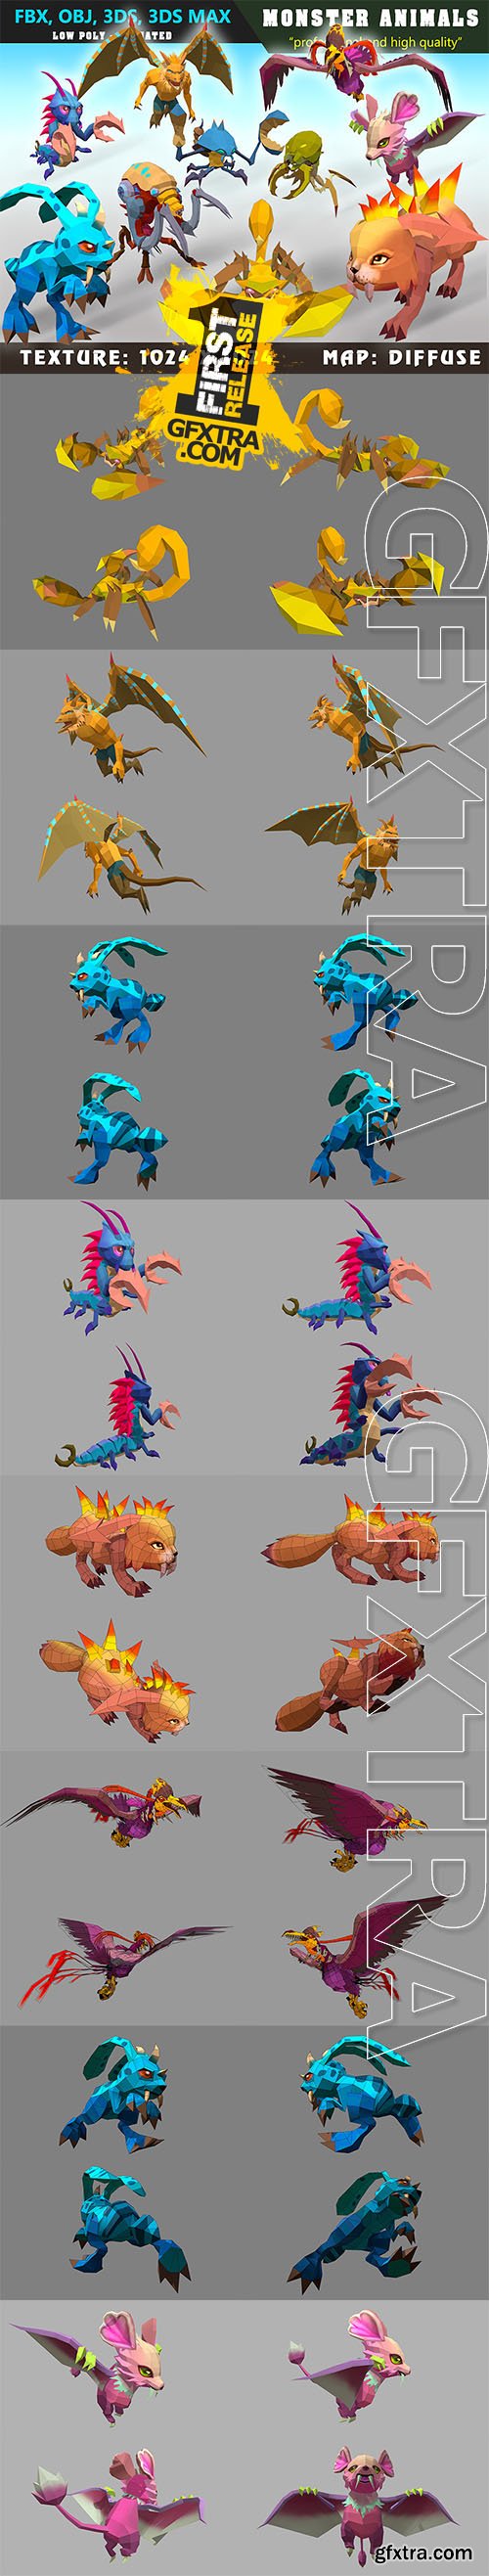 Cubebrush - Low Poly Monster Cartoon Collection 01 - Animated